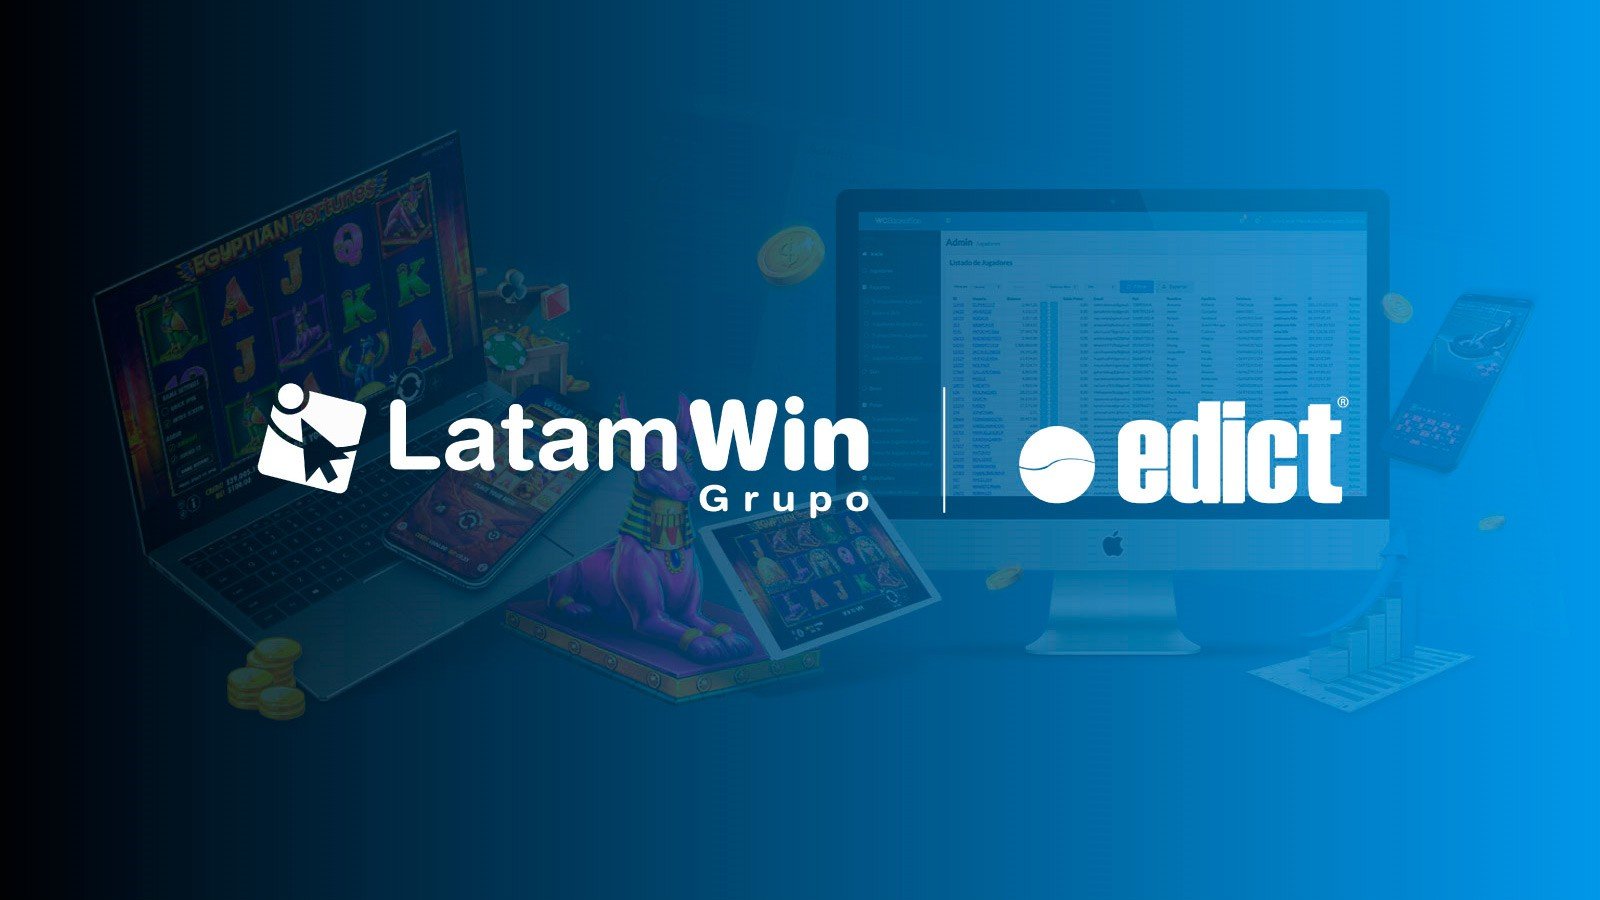 LatamWin Partners with Edict to Distribute Merkur Games in LatAm